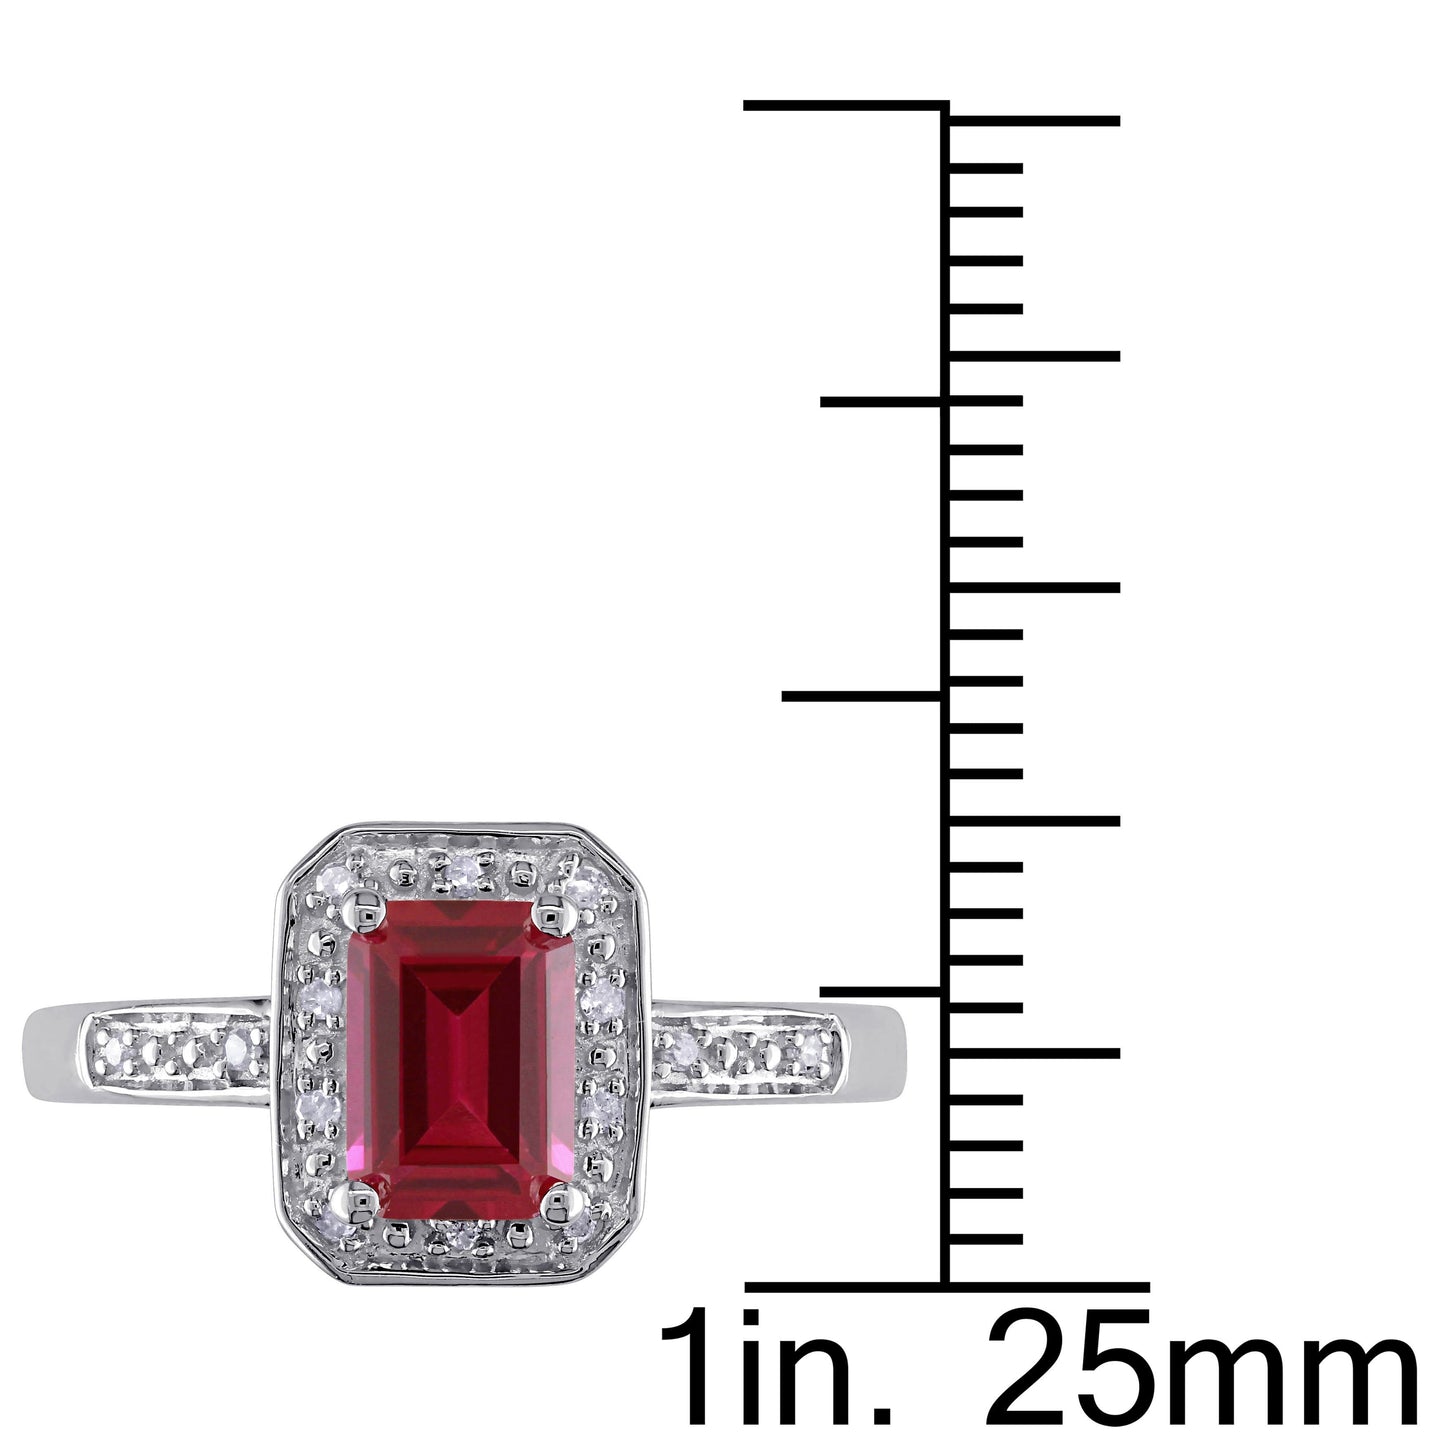 Sophia B Ruby Halo Ring with Diamond Accents